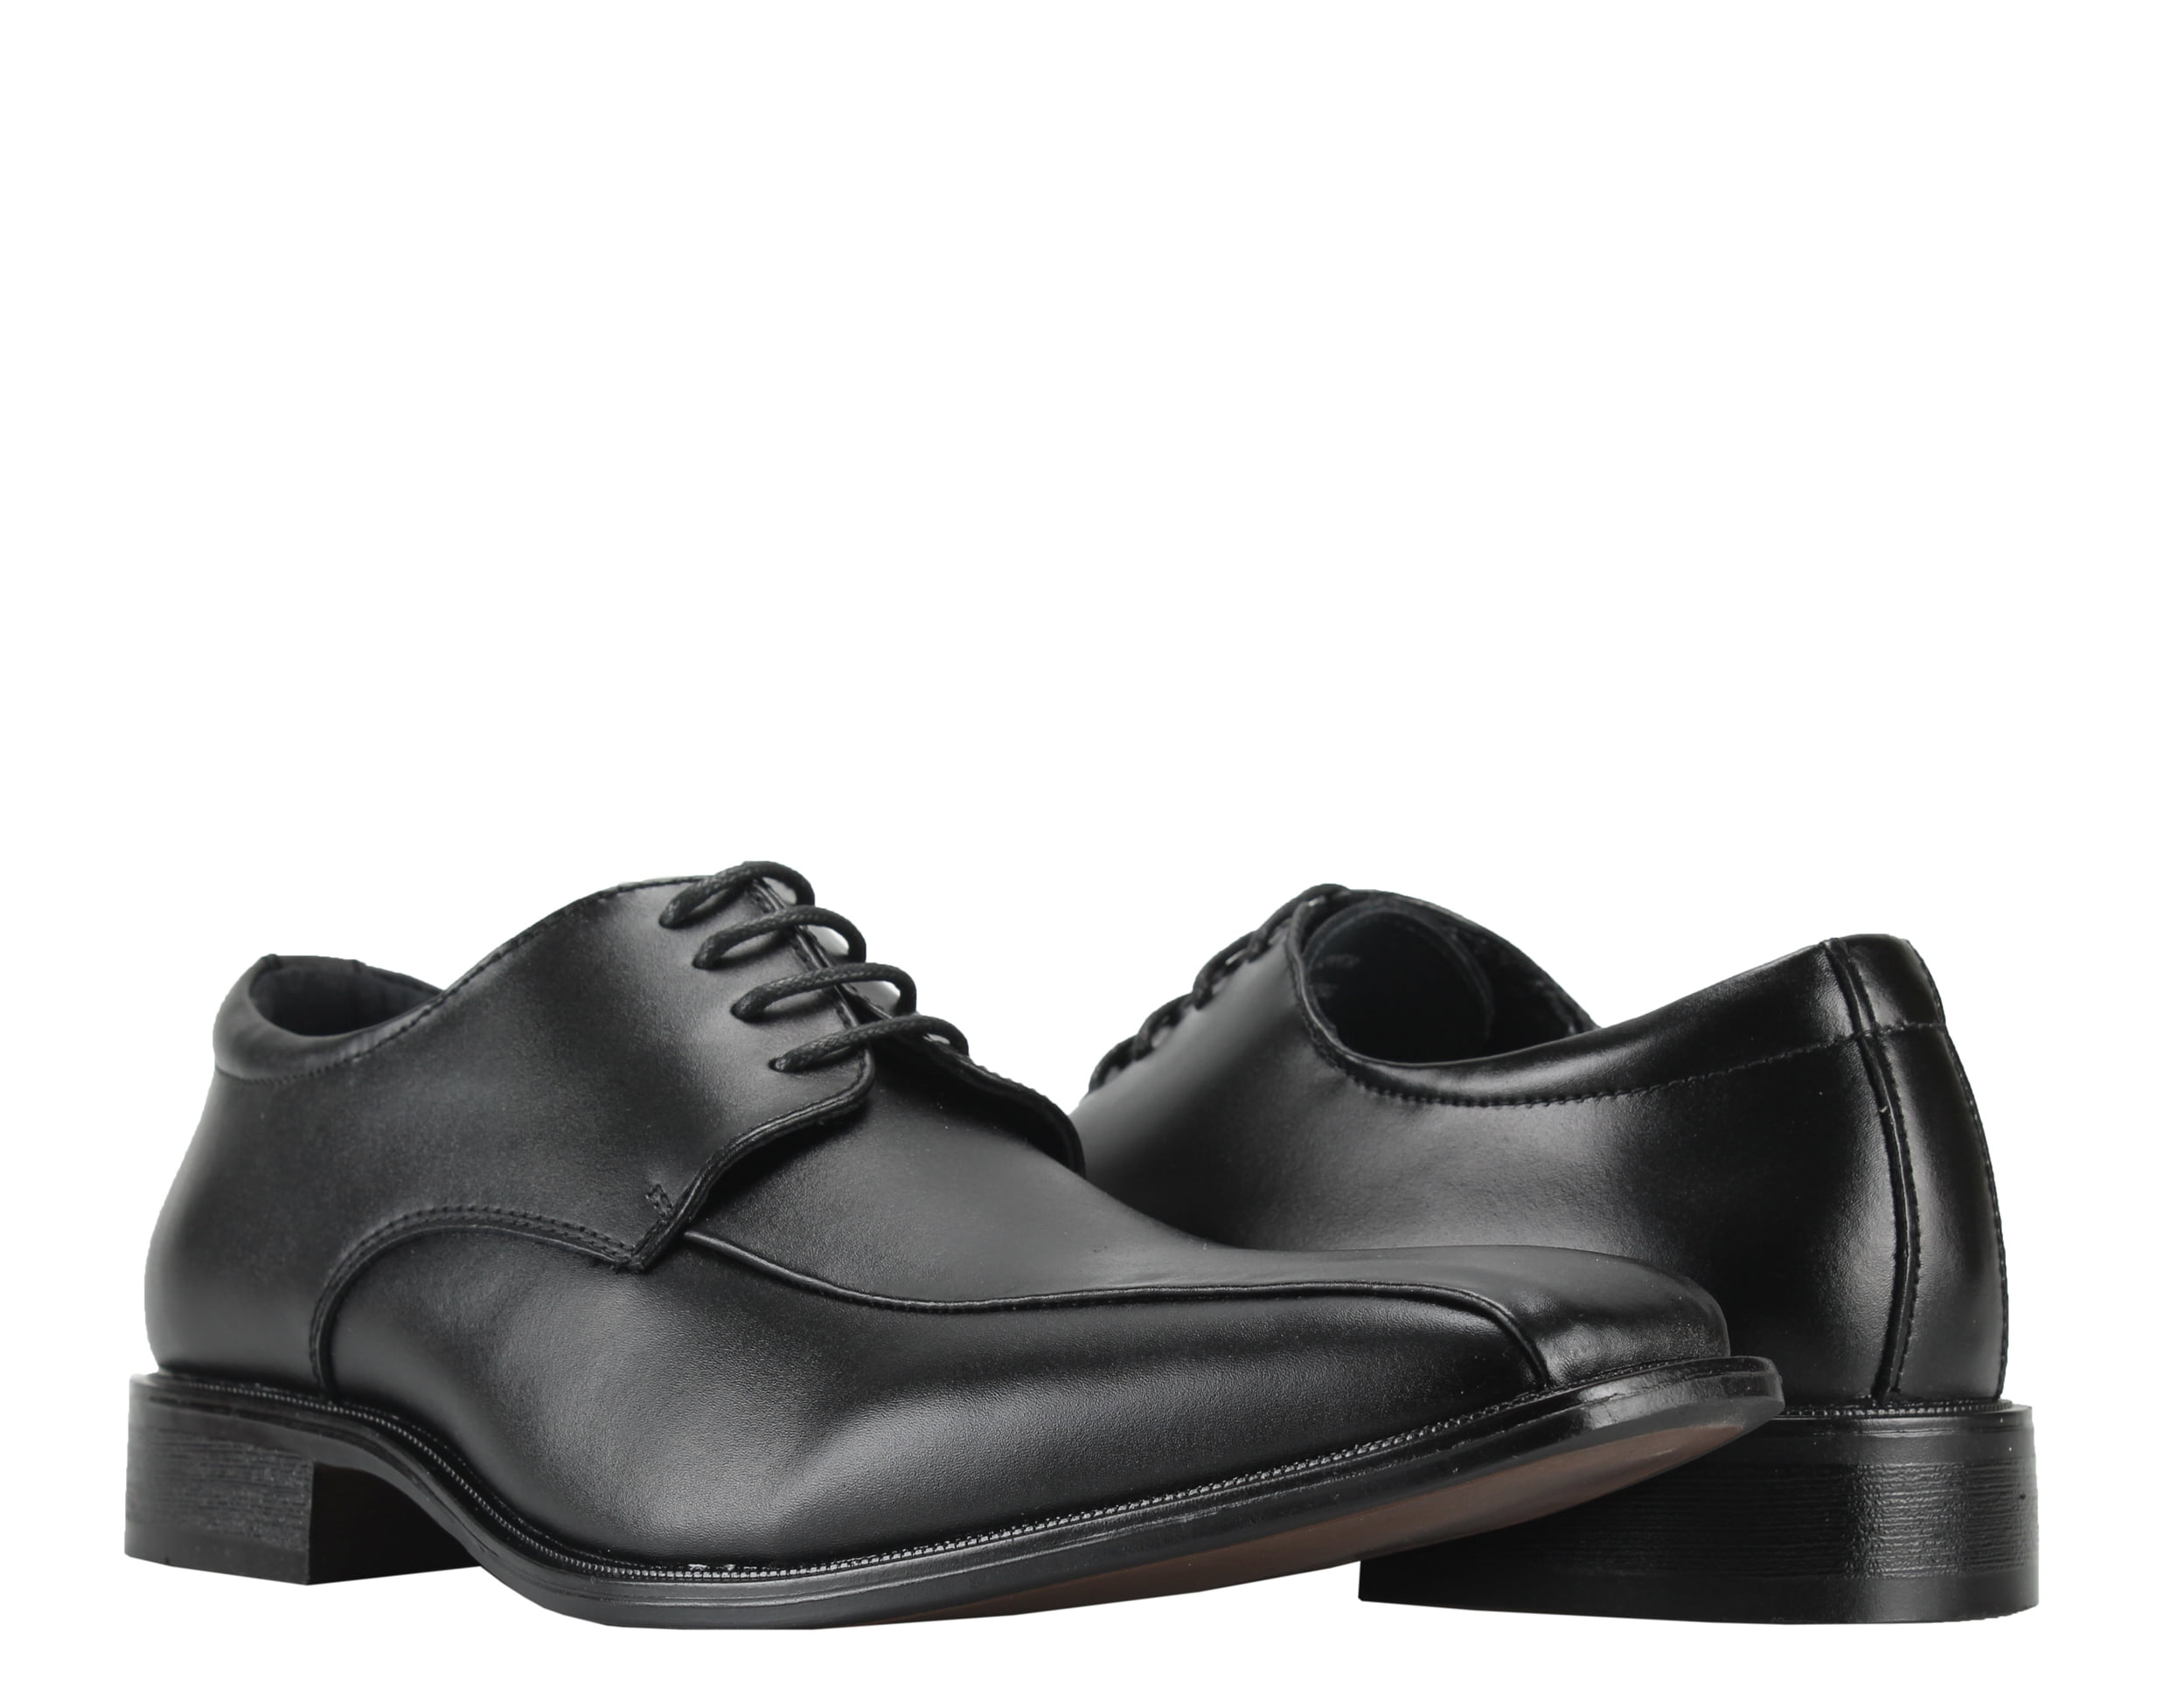 Bicycle-Toe Oxford Dress Shoes 